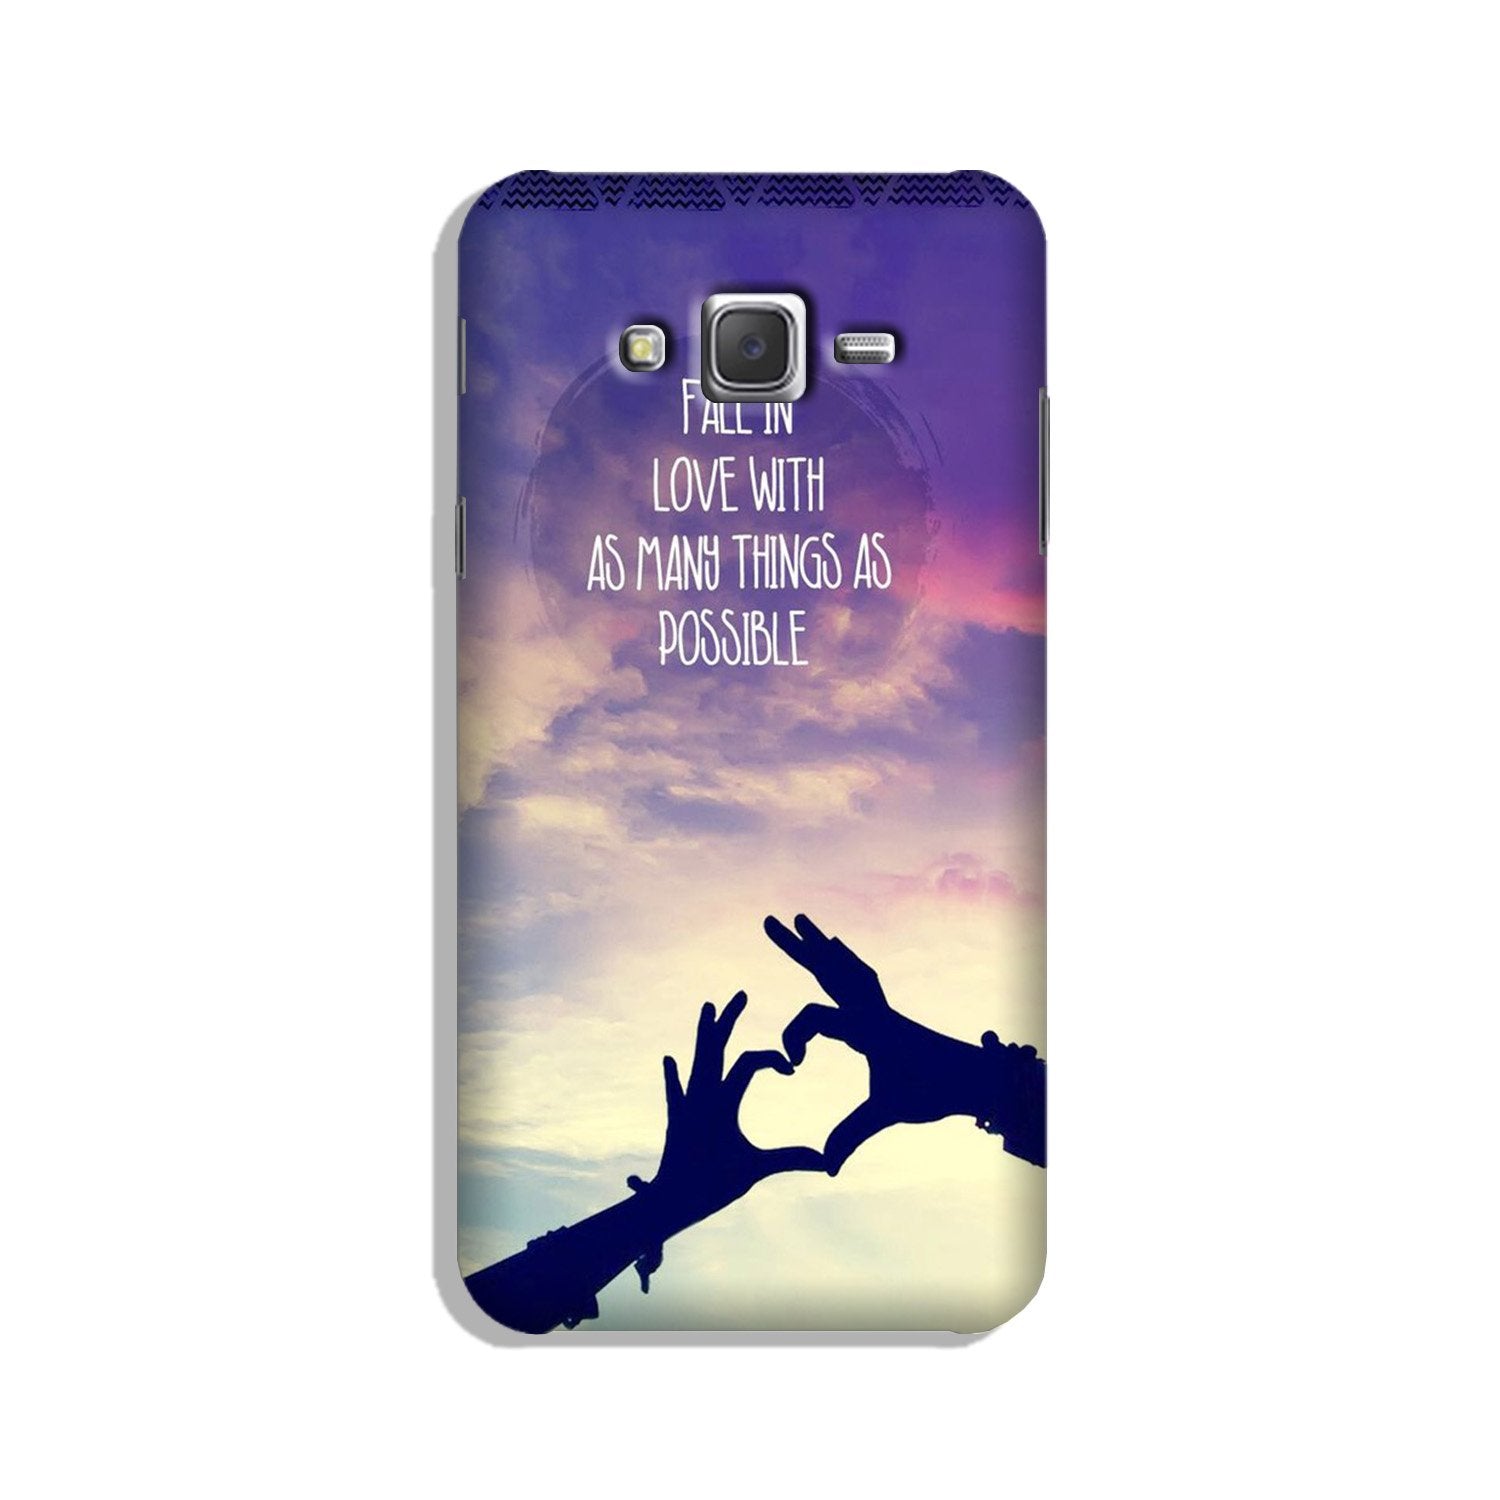 Fall in love Case for Galaxy J5 (2015)